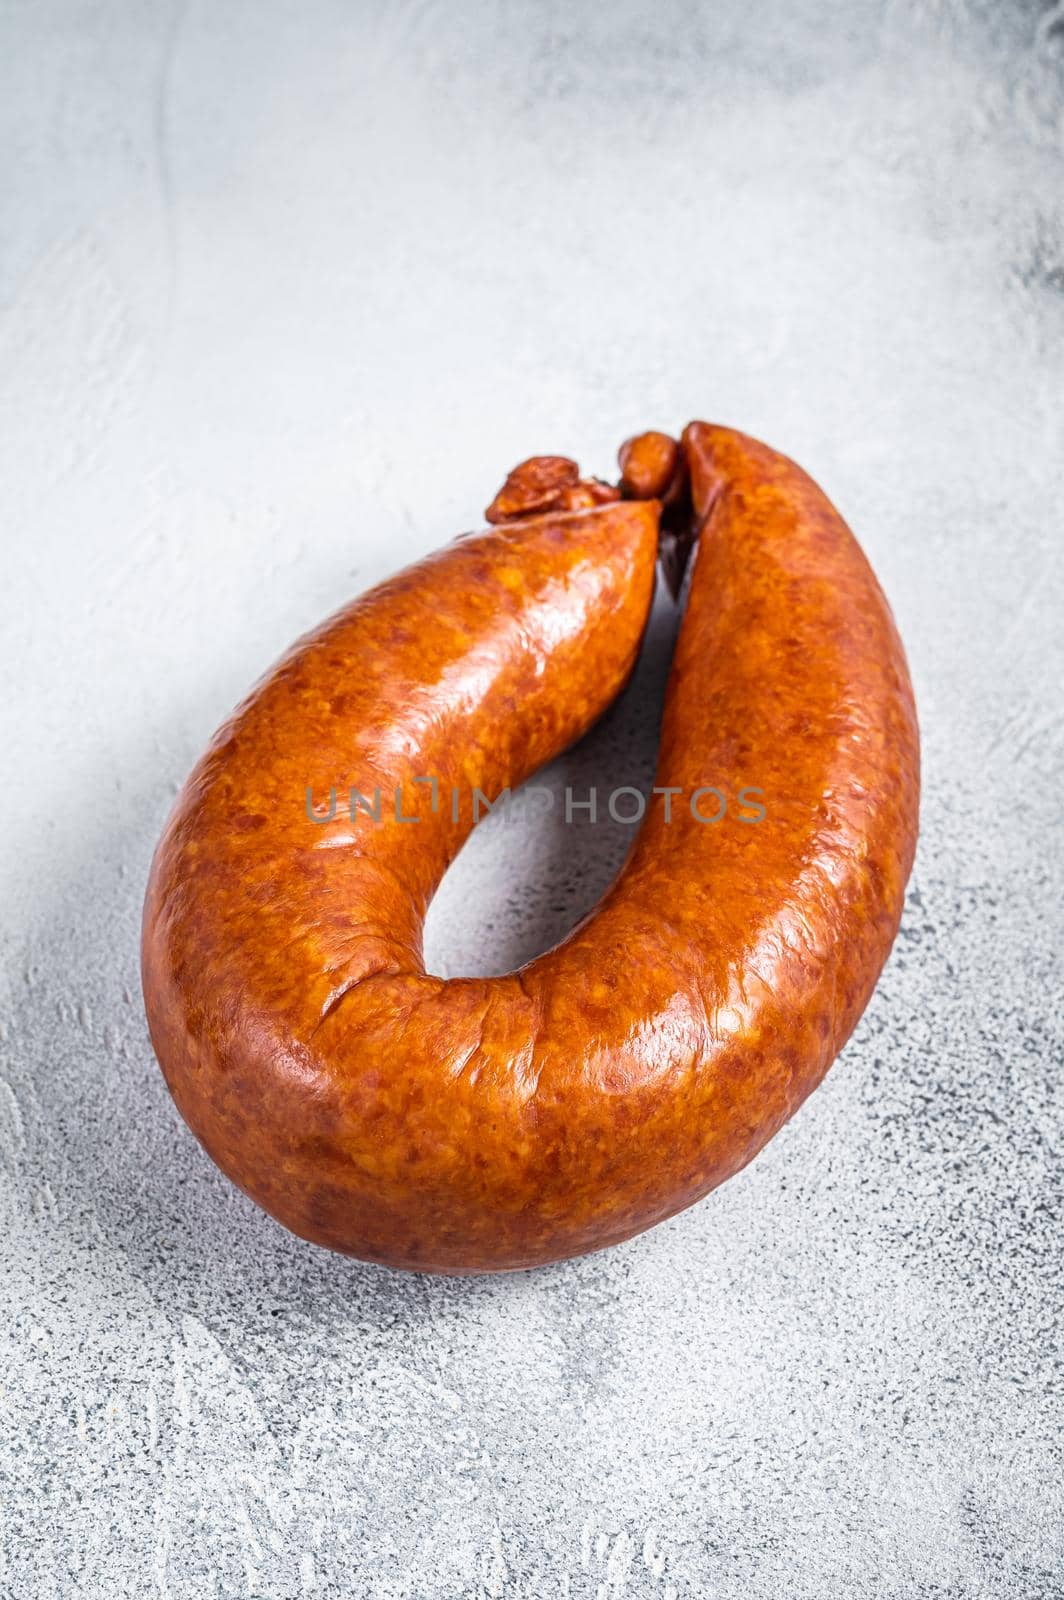 Smoked sausage on a white rustic table. White background. Top view by Composter